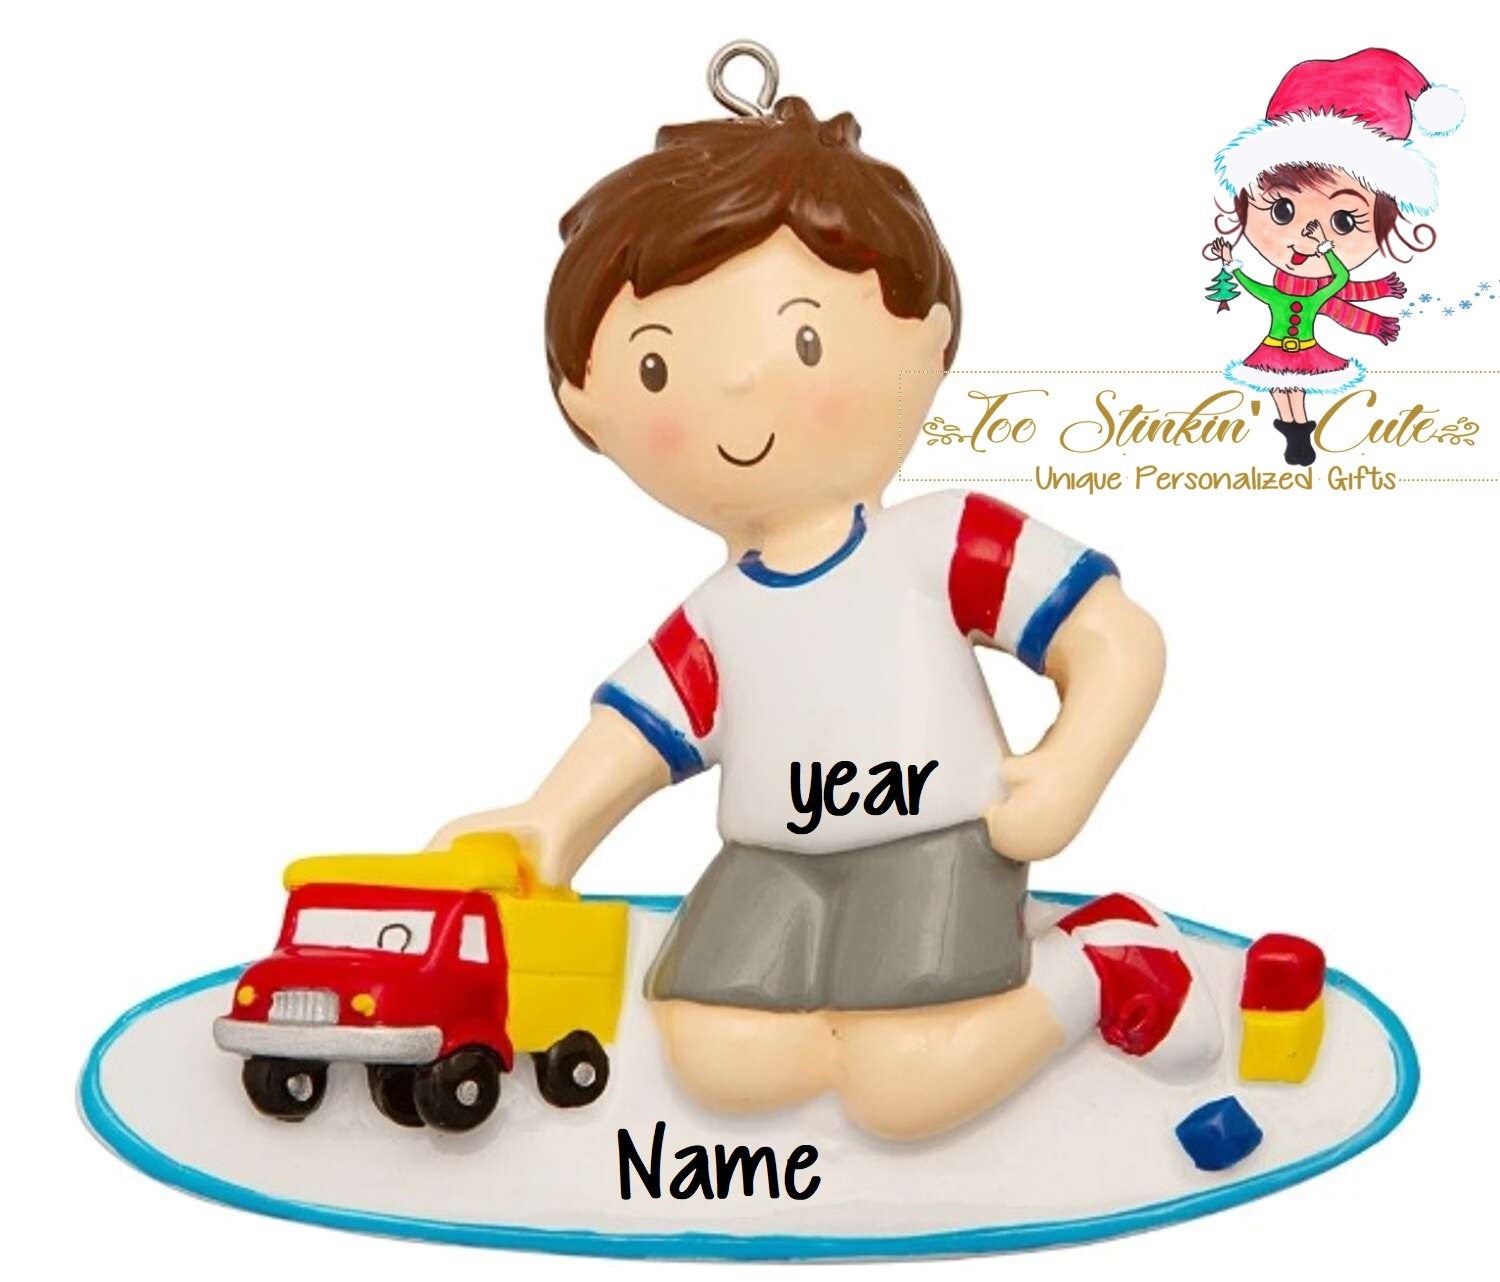 Personalized Christmas Ornament Boy Playing with Truck Toy Cars + Free Shipping!